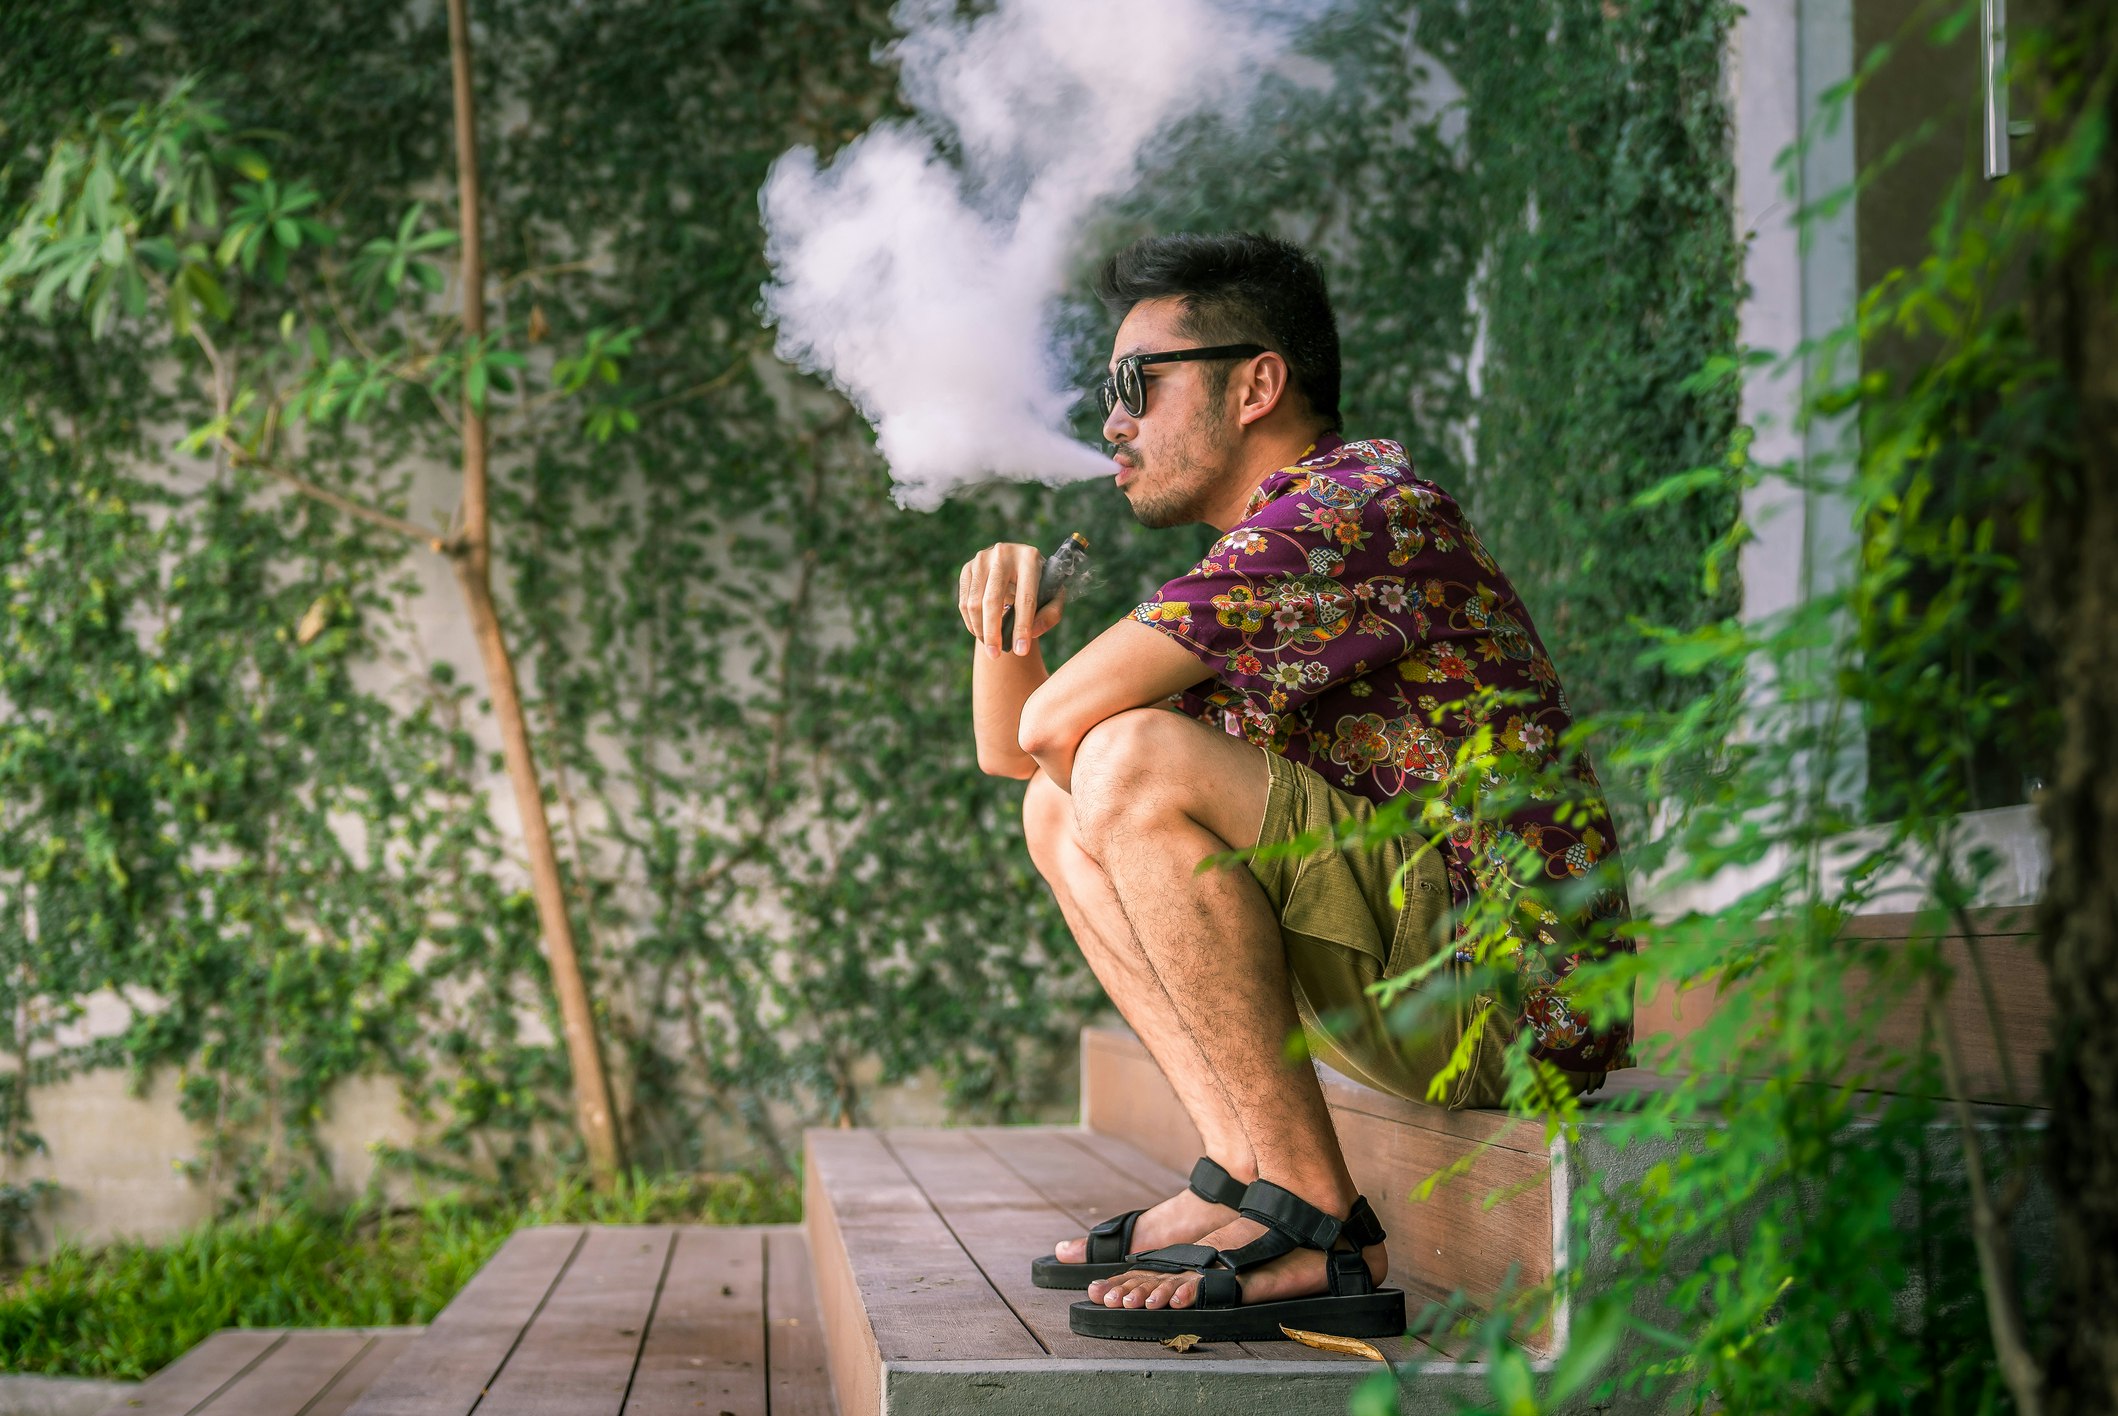 Travel News - Man Using An Electric Cigarette